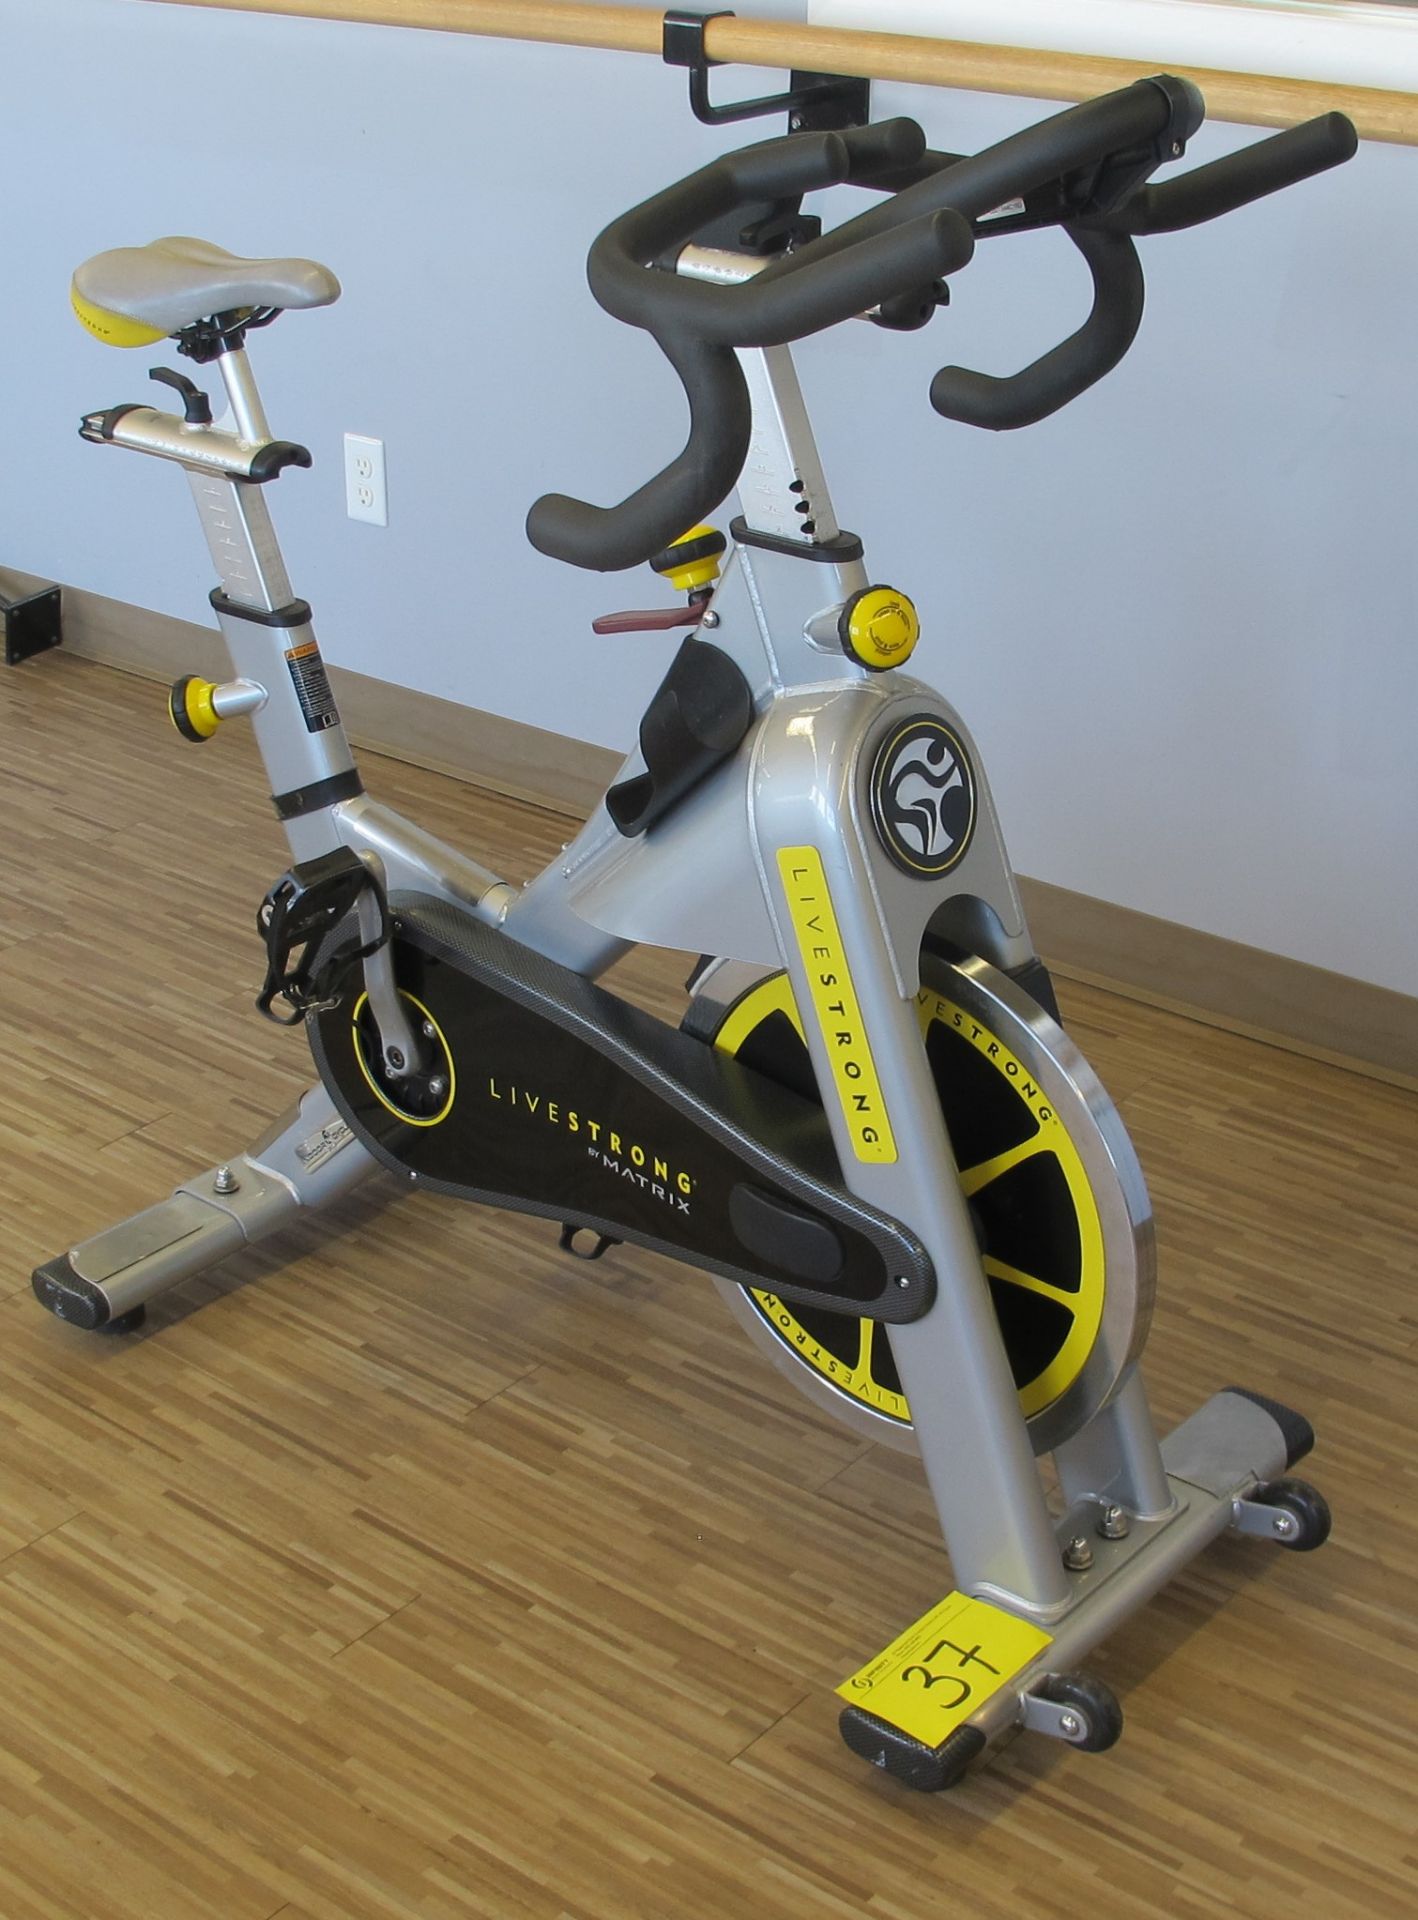 LIVESTRONG LS S-Series Class S Stationary Spin Bike, S/N: LASB0008039-111